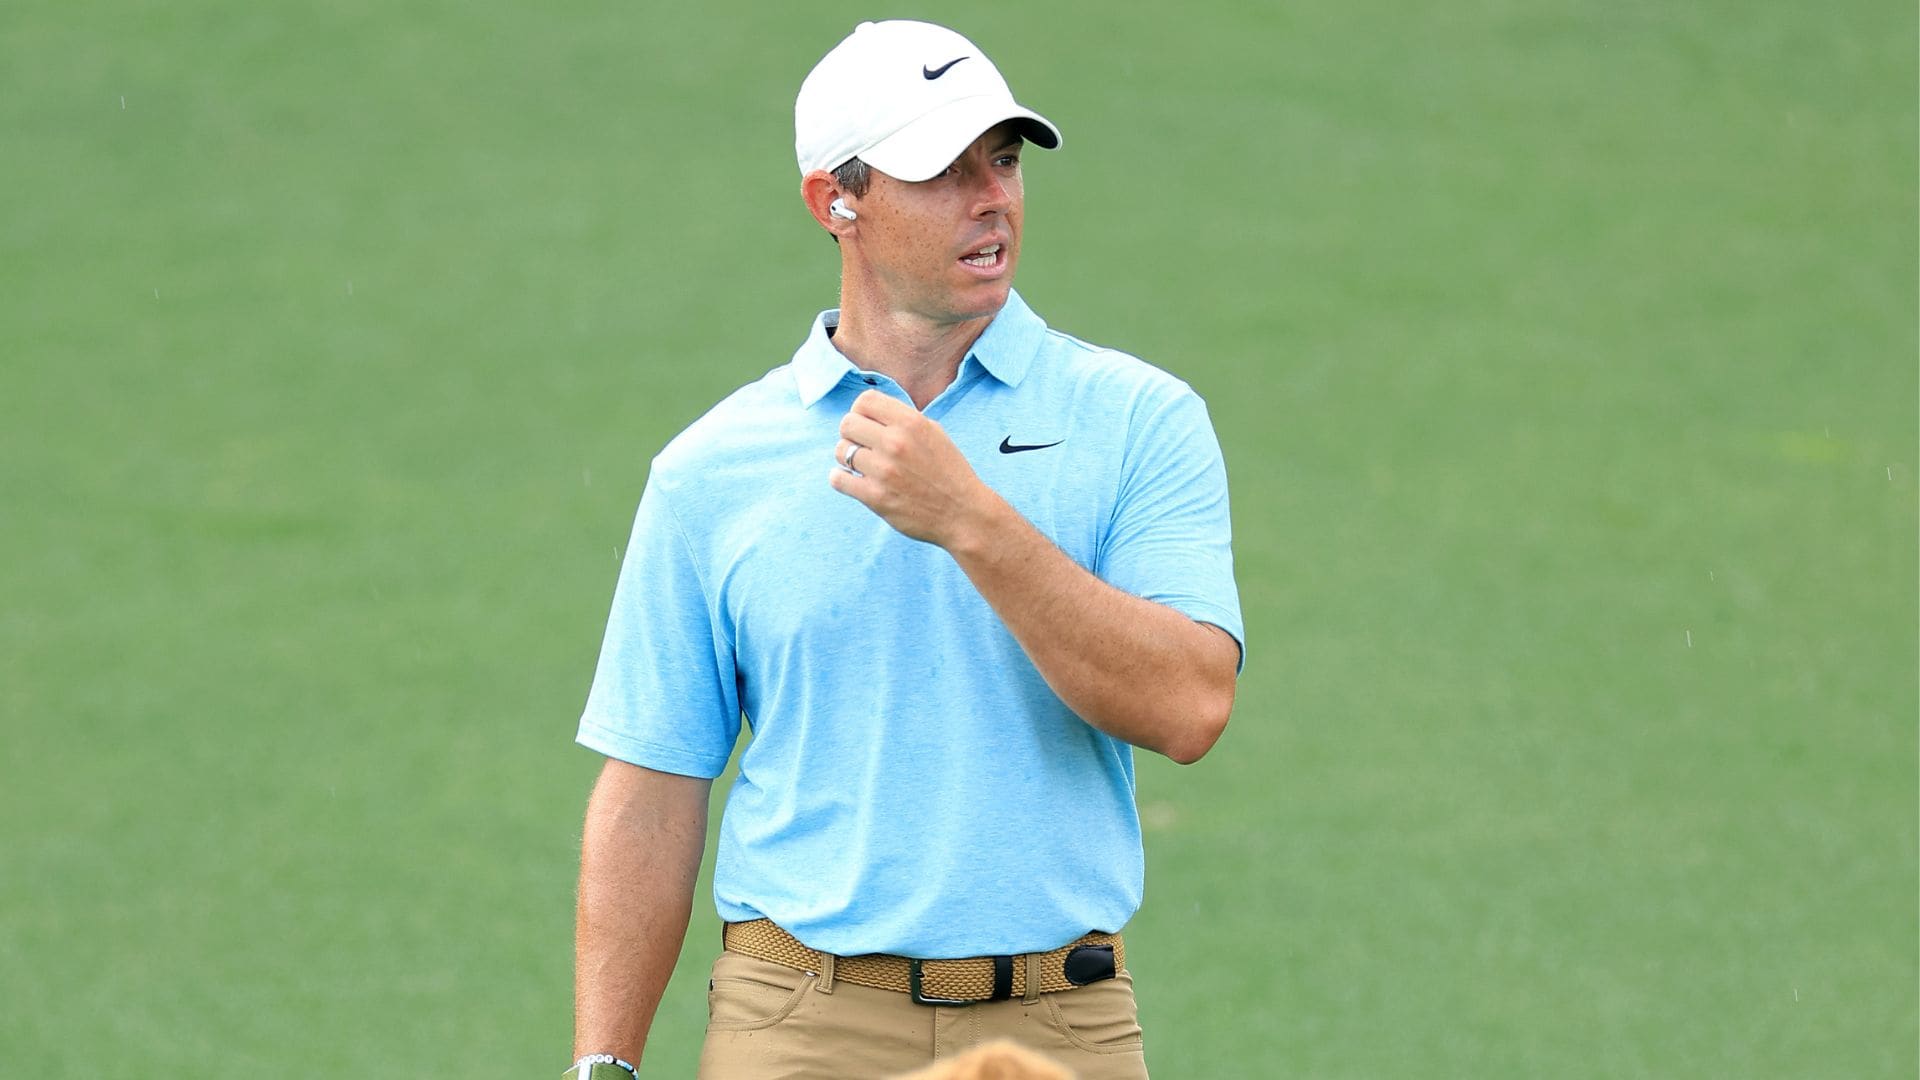 First Masters ‘walk-and-talk’ features Rory McIlroy, Max Homa